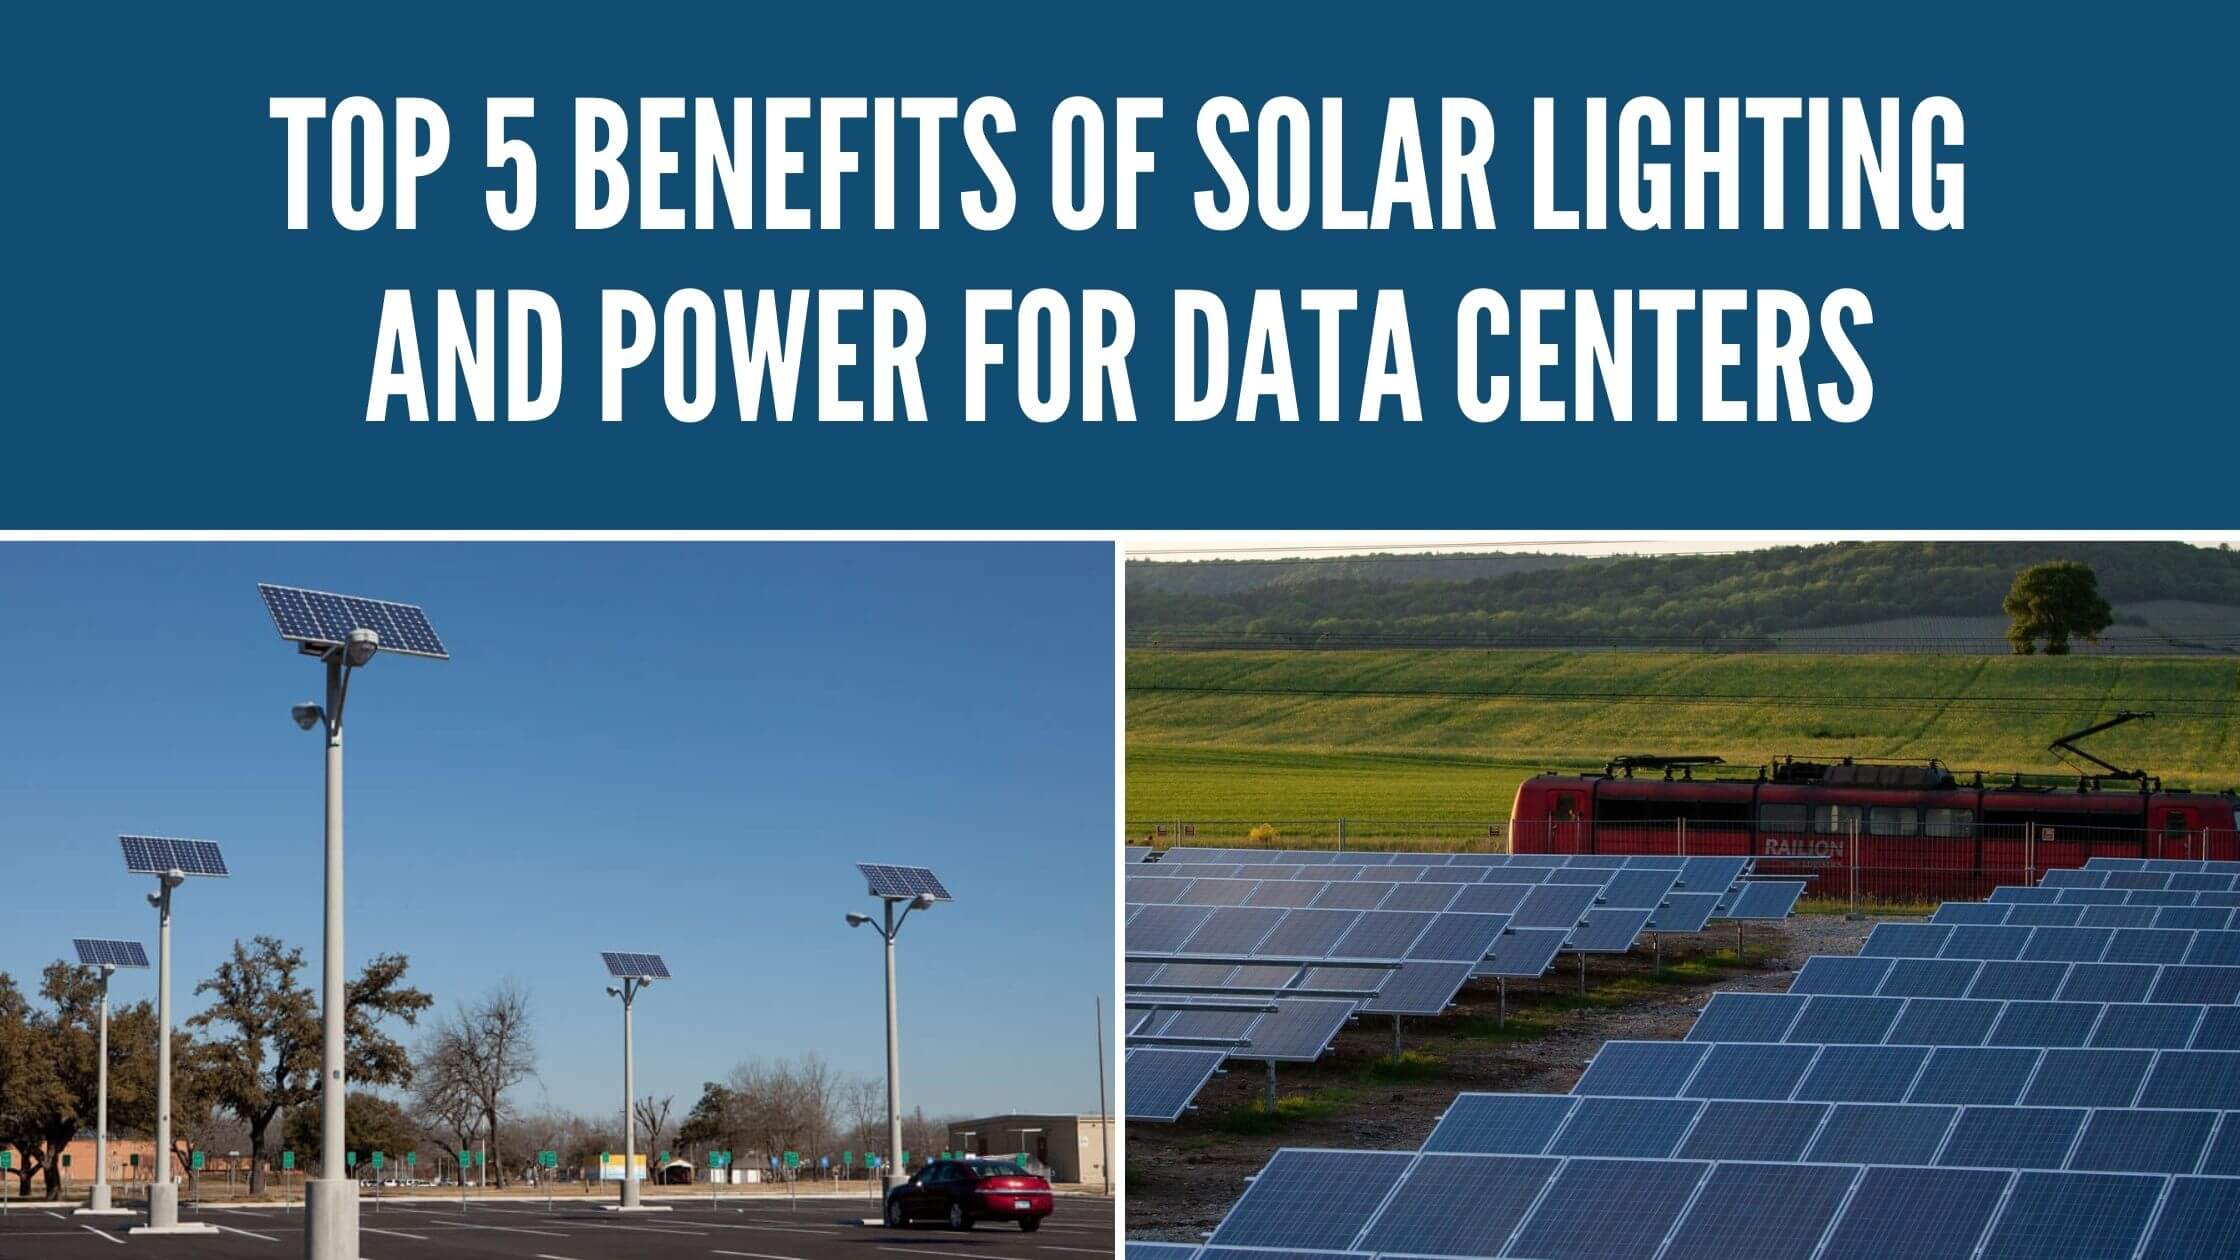 Top 5 Benefits of Solar Lighting and Power for Data Centers